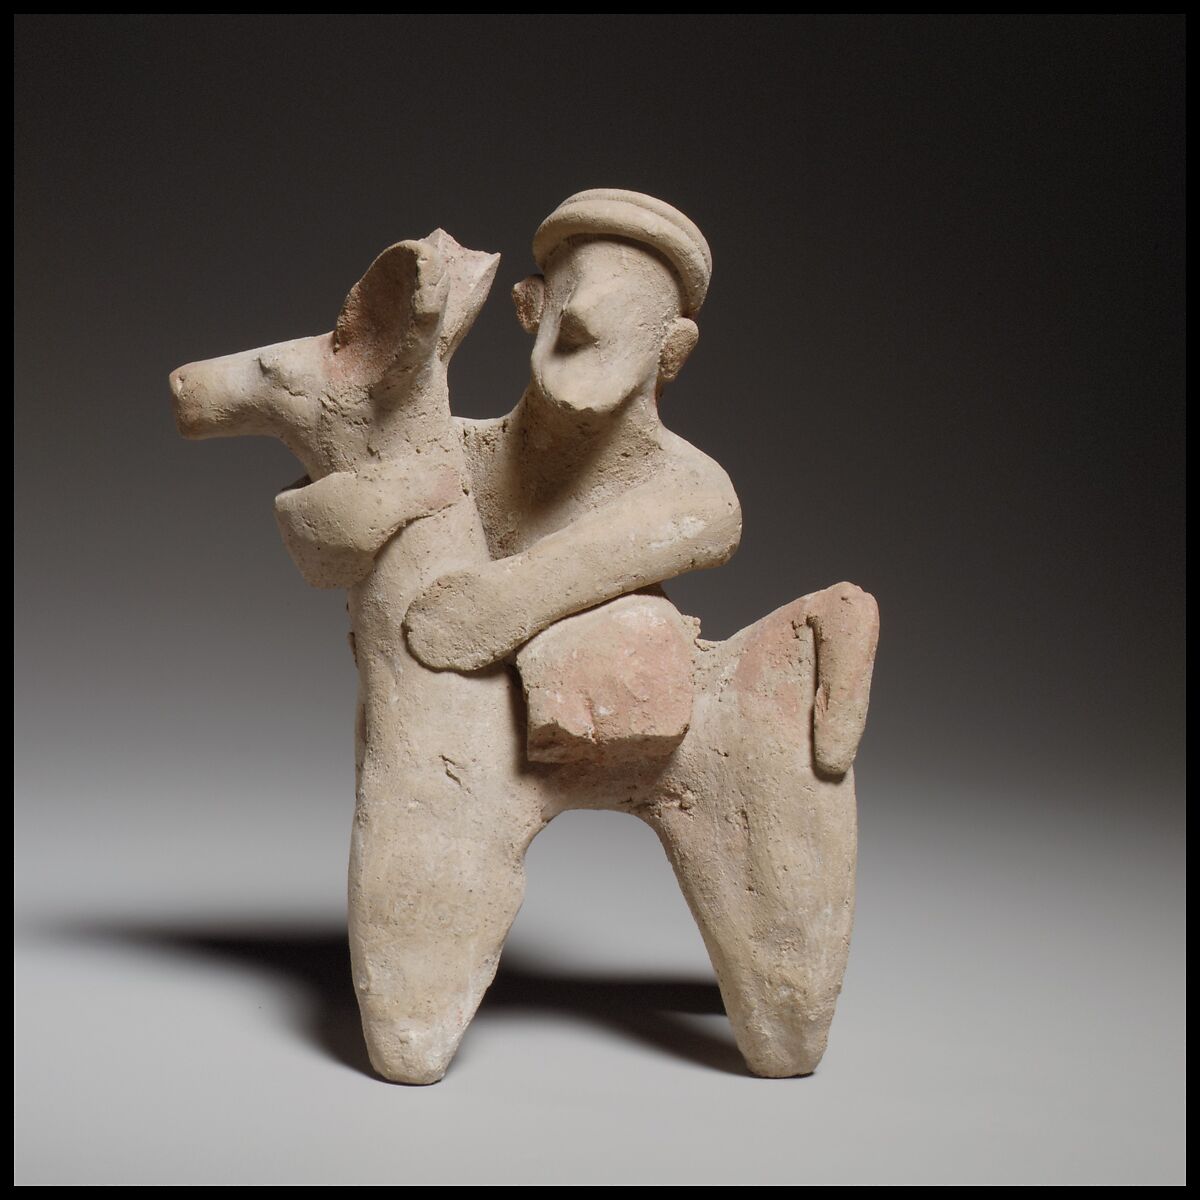 Terracotta statuette of a donkey and rider, Terracotta, Cypriot 